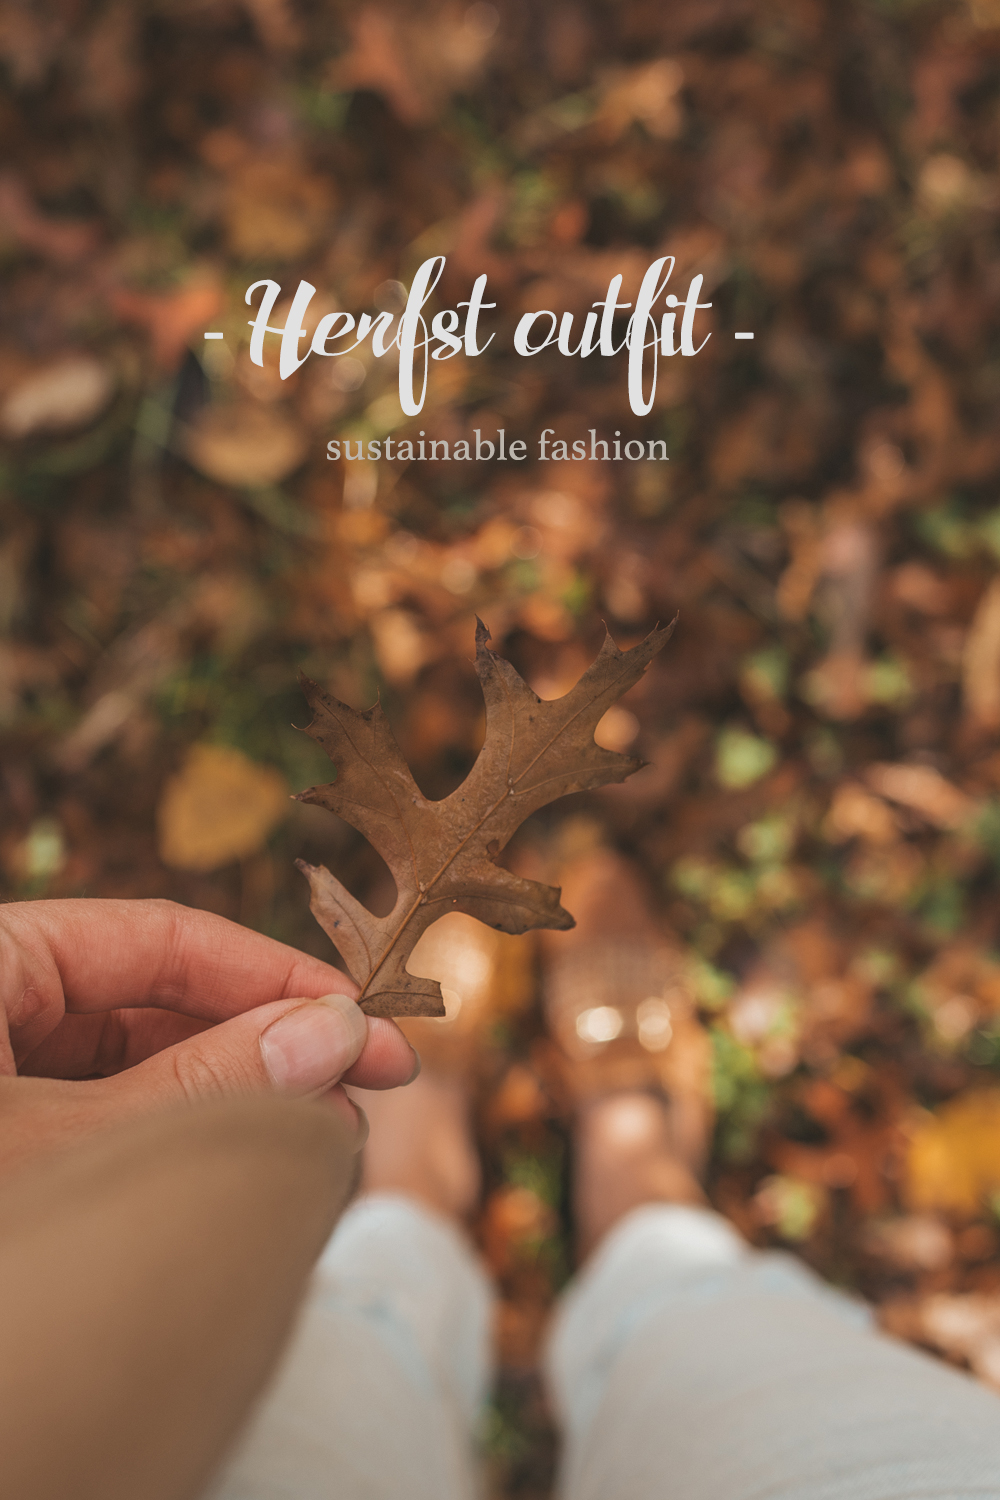 Herfst outfit sustainable fashion